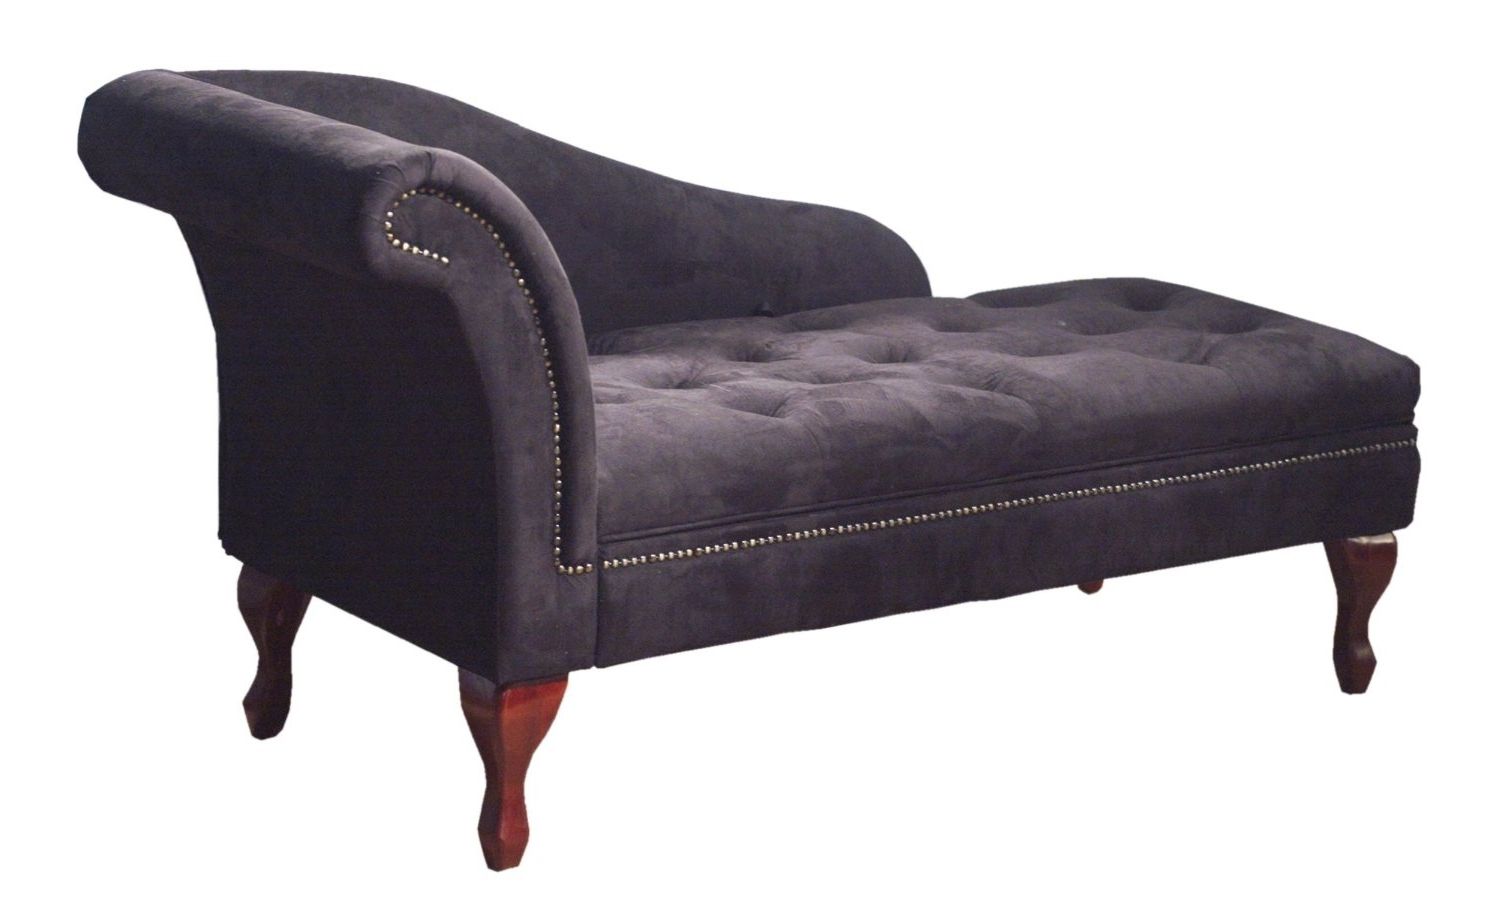 Most Current Black Indoors Chaise Lounge Chairs Pertaining To Furniture: Indoor Chaise Lounge Chair With Chaise Lounge Indoor (View 6 of 15)